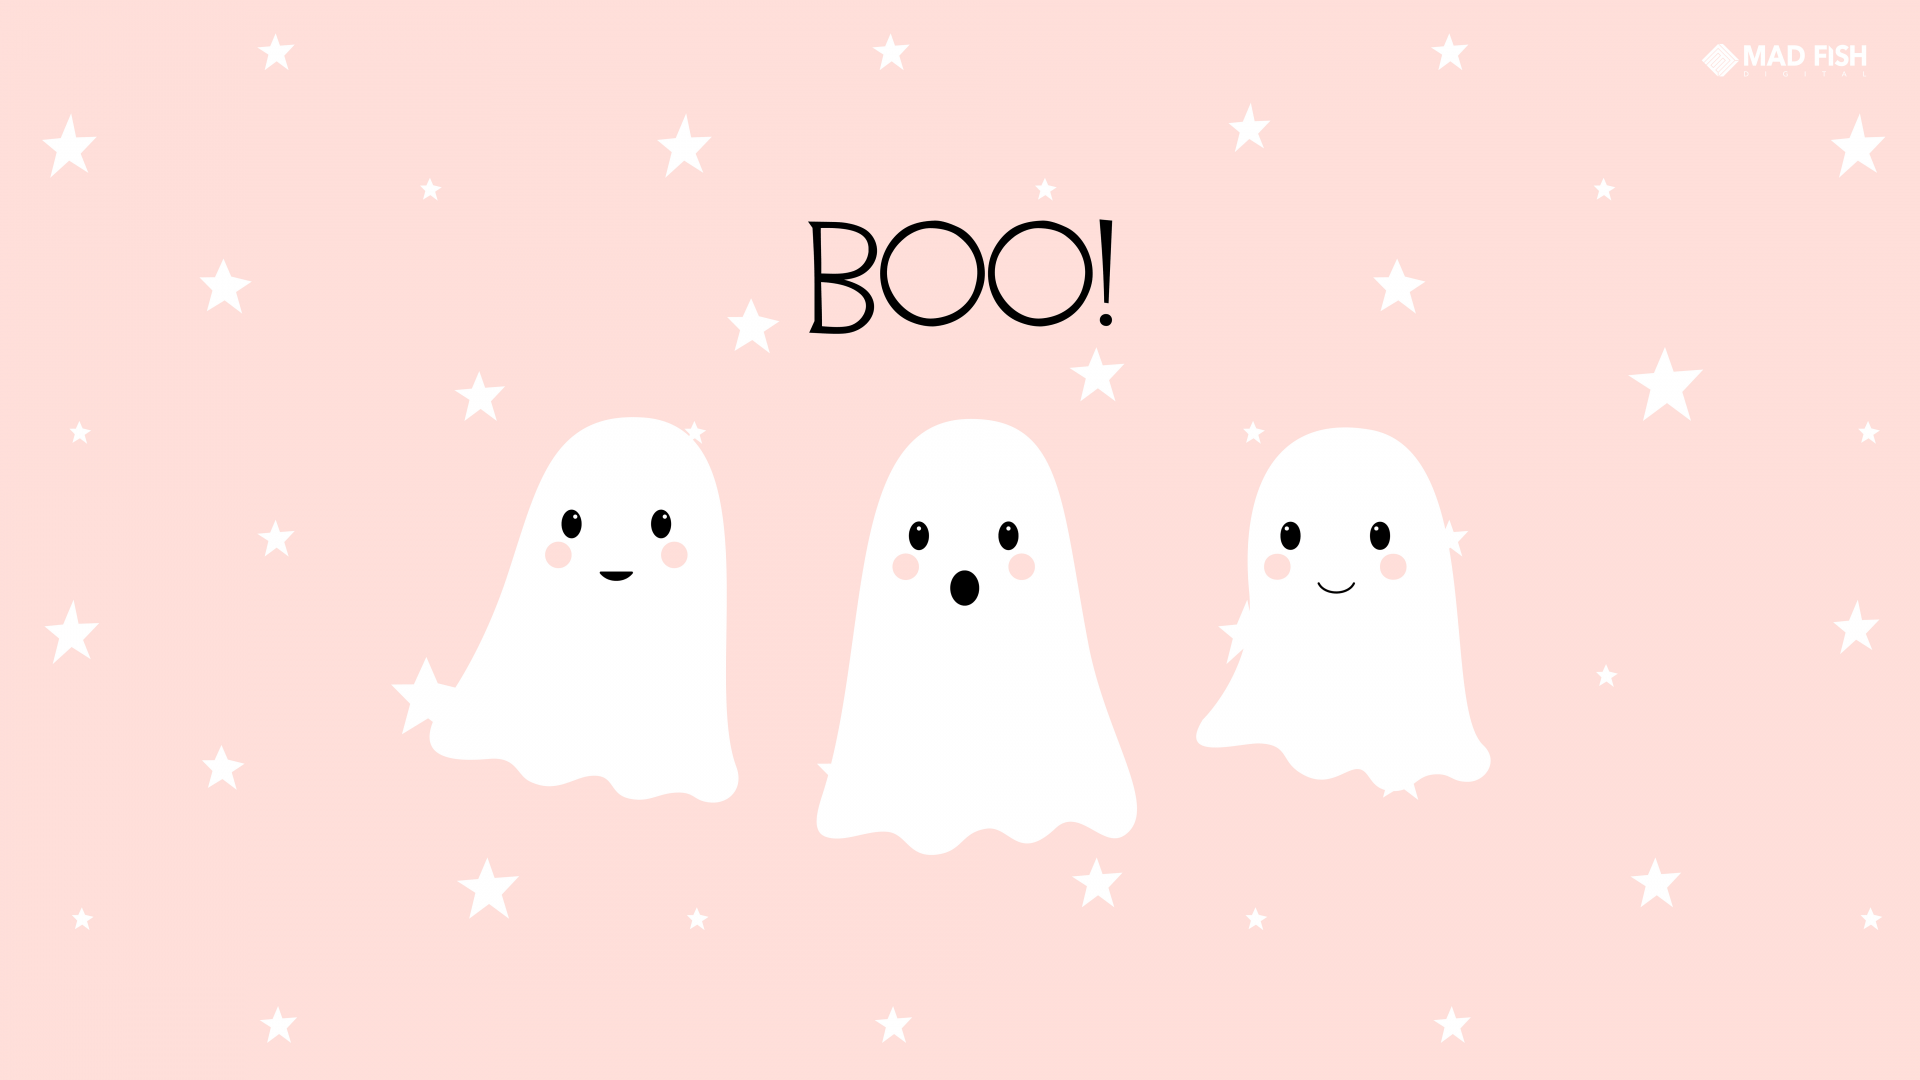 Three cute ghosts on a pink background with the word 